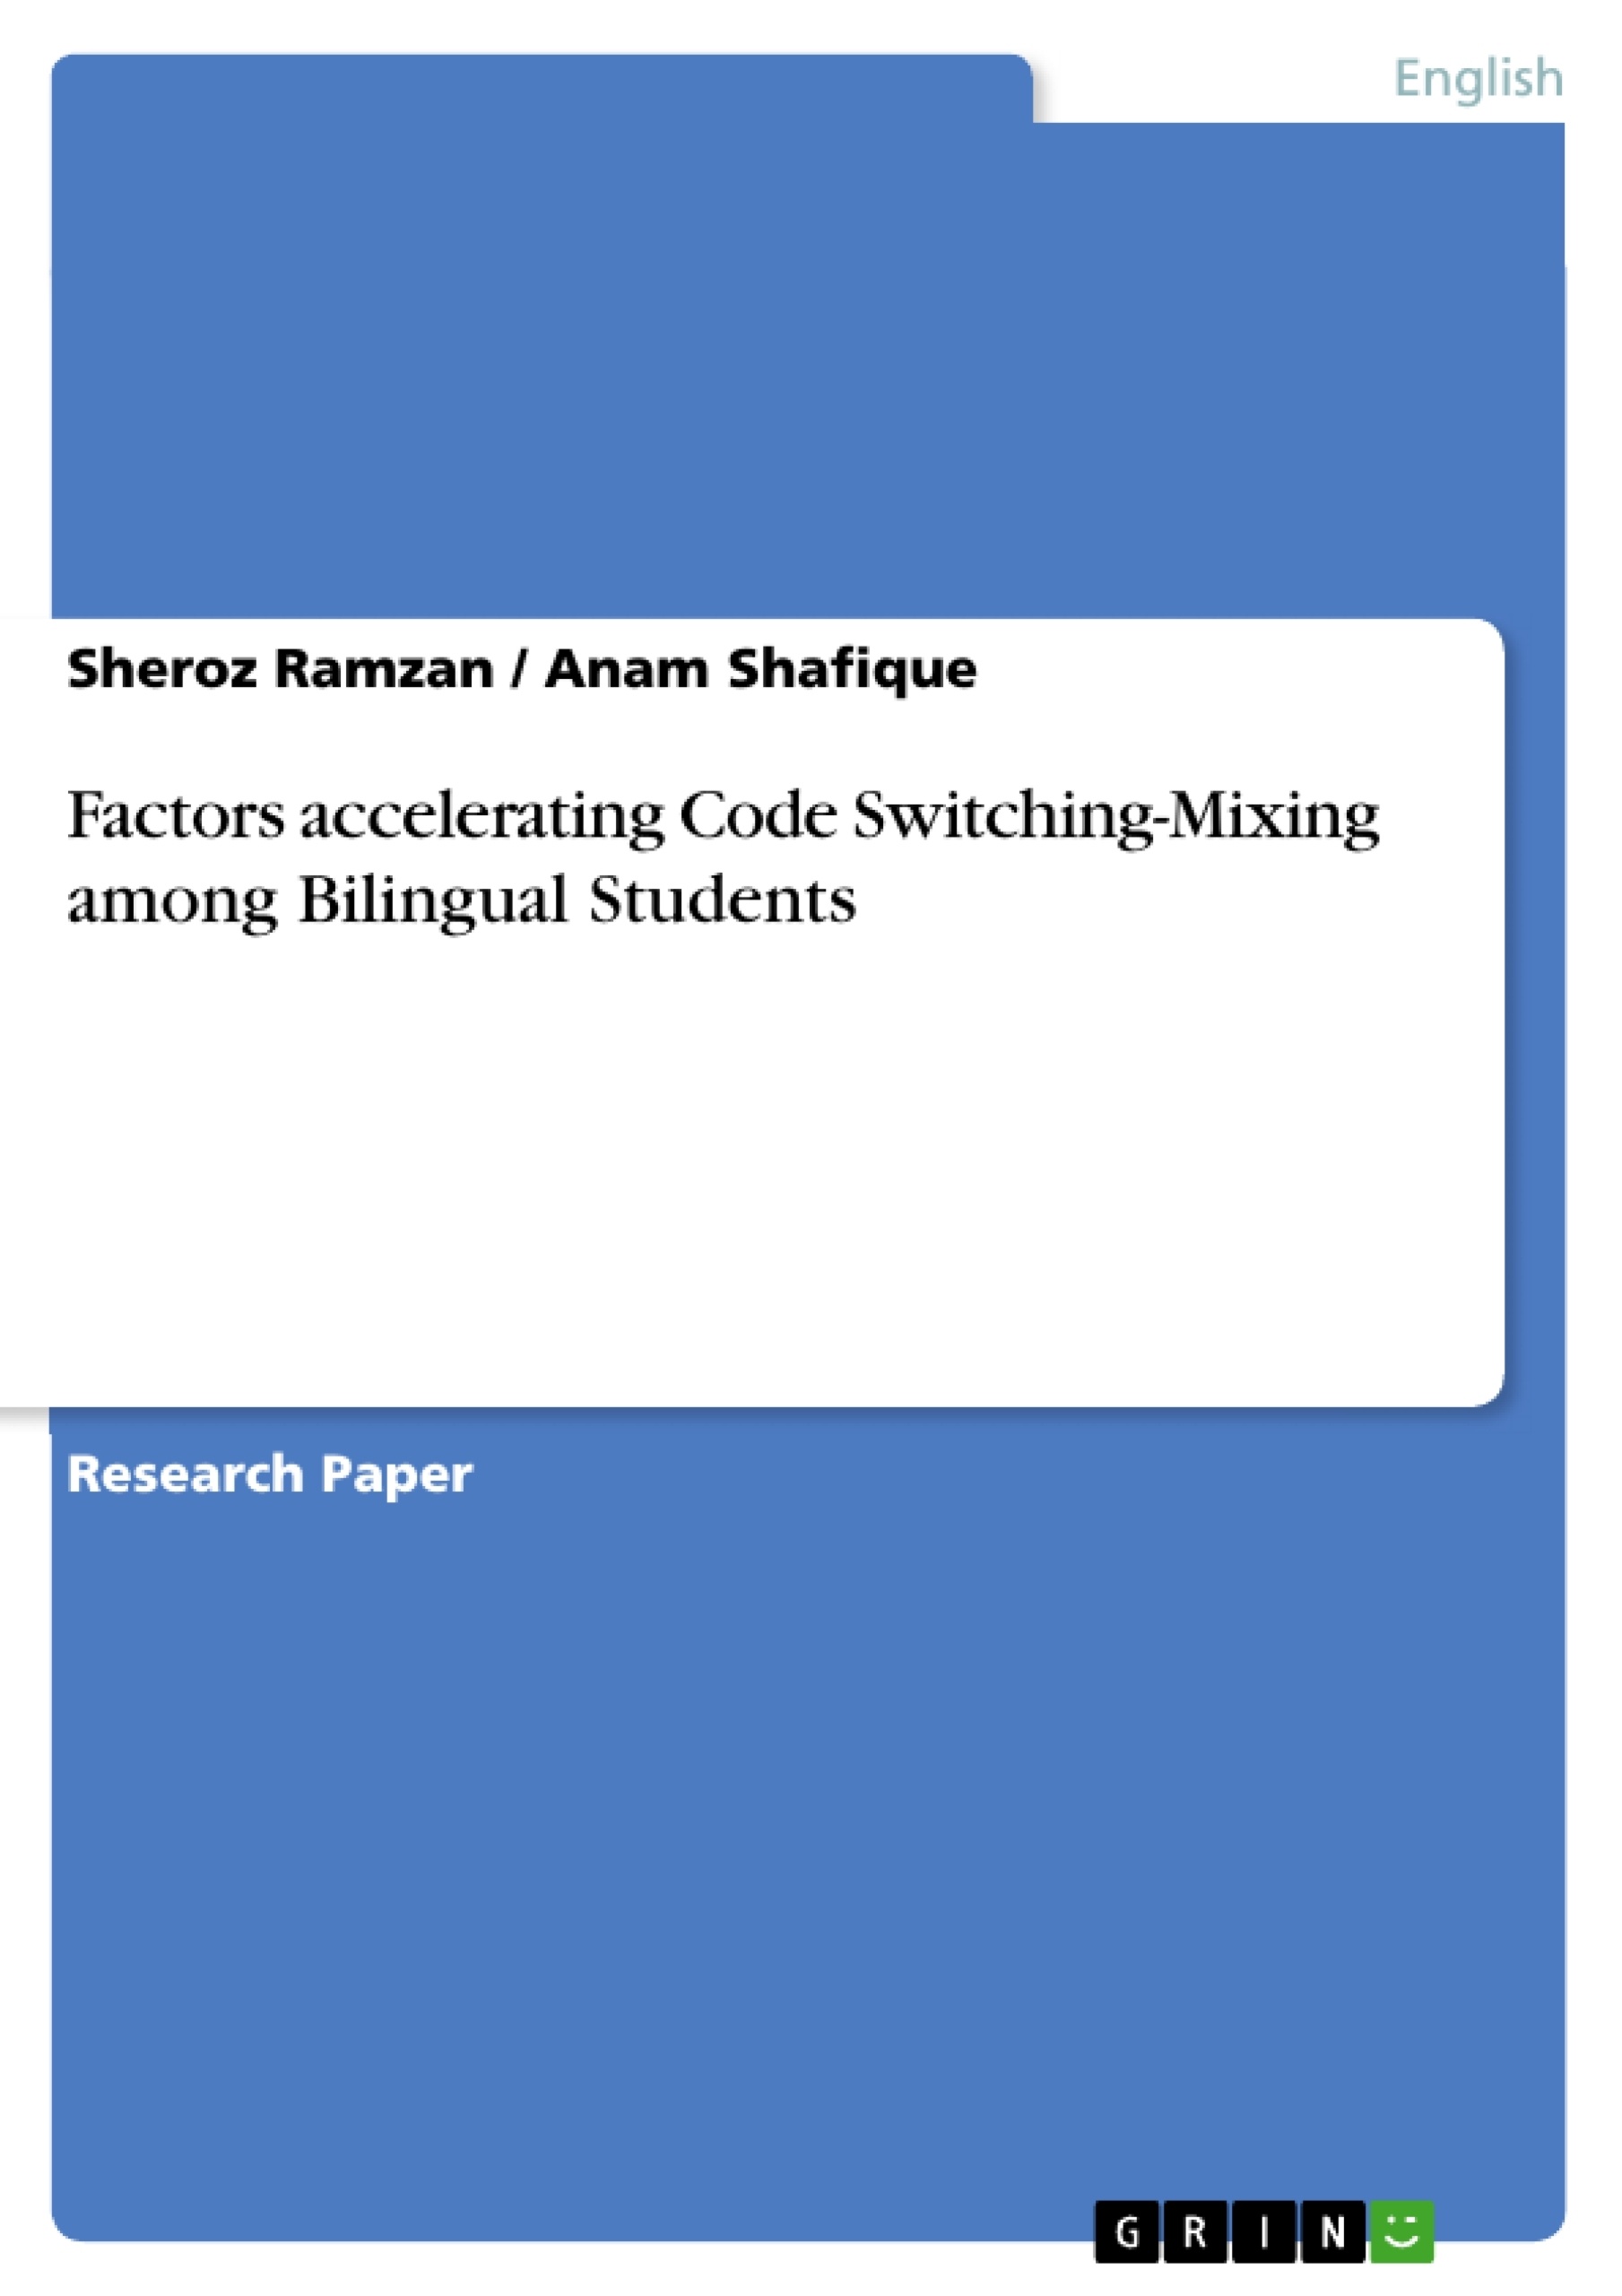 Title: Factors accelerating Code Switching-Mixing among Bilingual Students